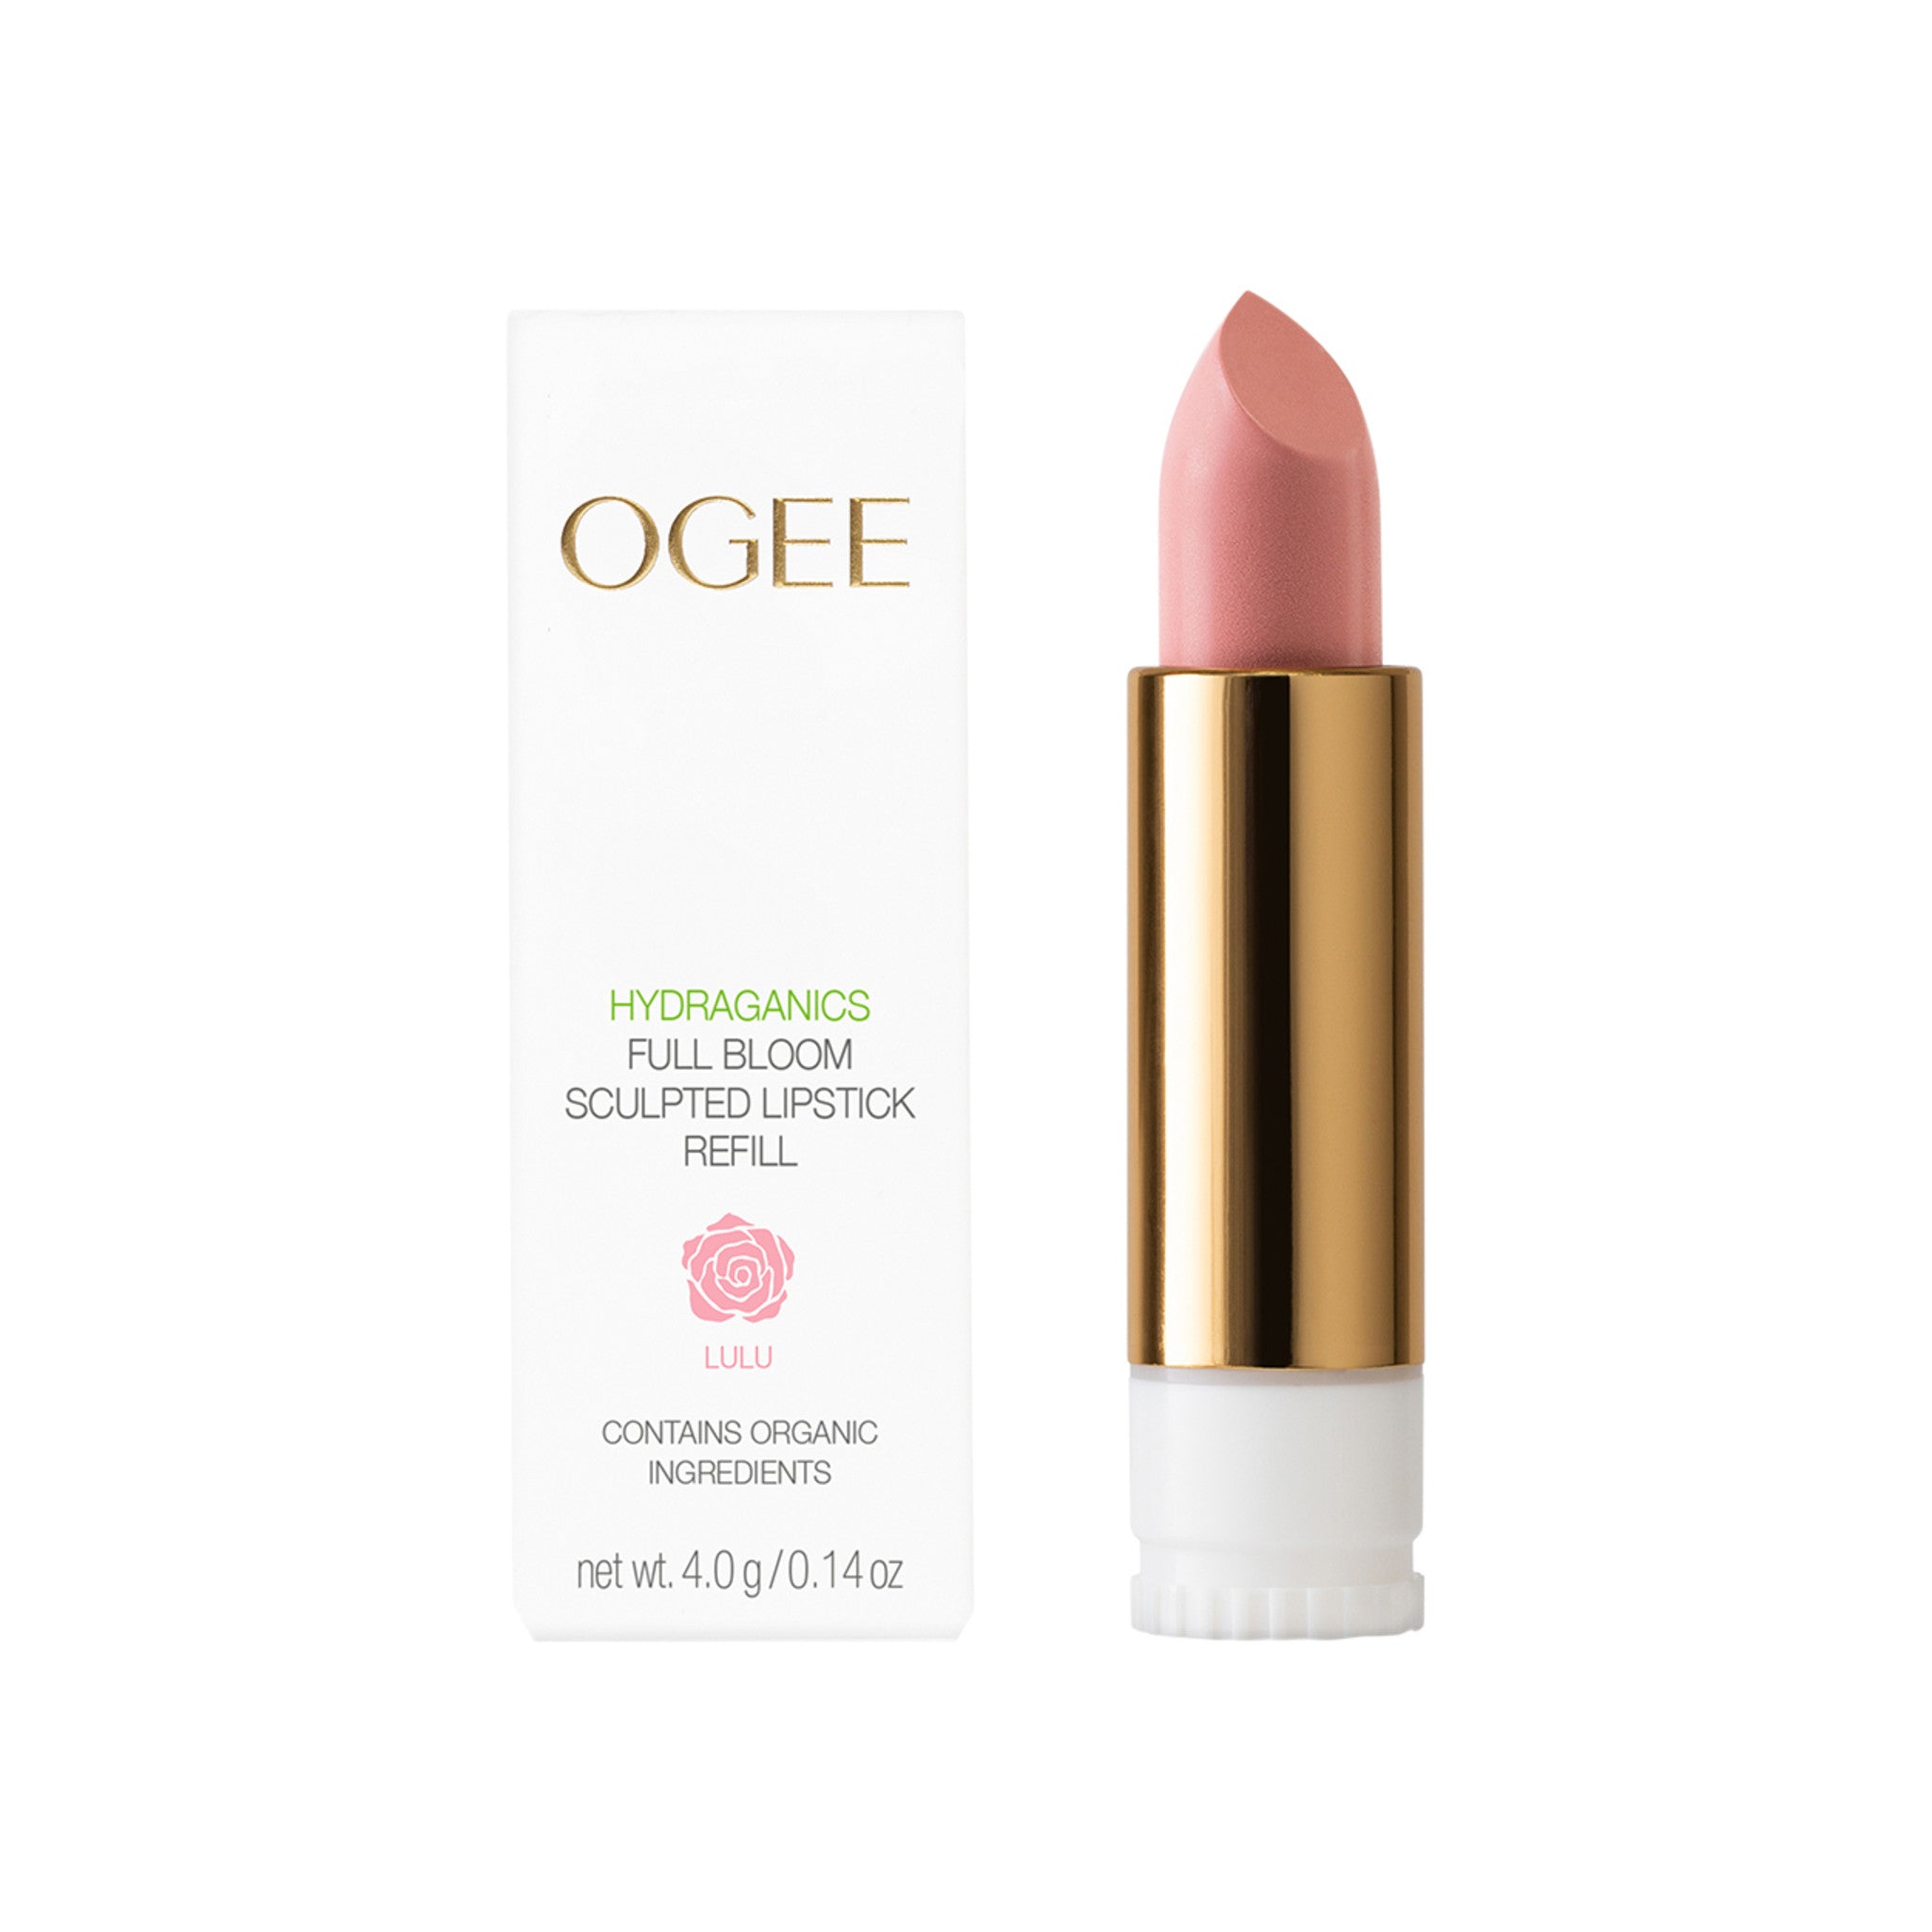 Ogee Full Bloom Sculpted Lipstick Refill Color/Shade variant: Lulu main image. This product is in the color pink